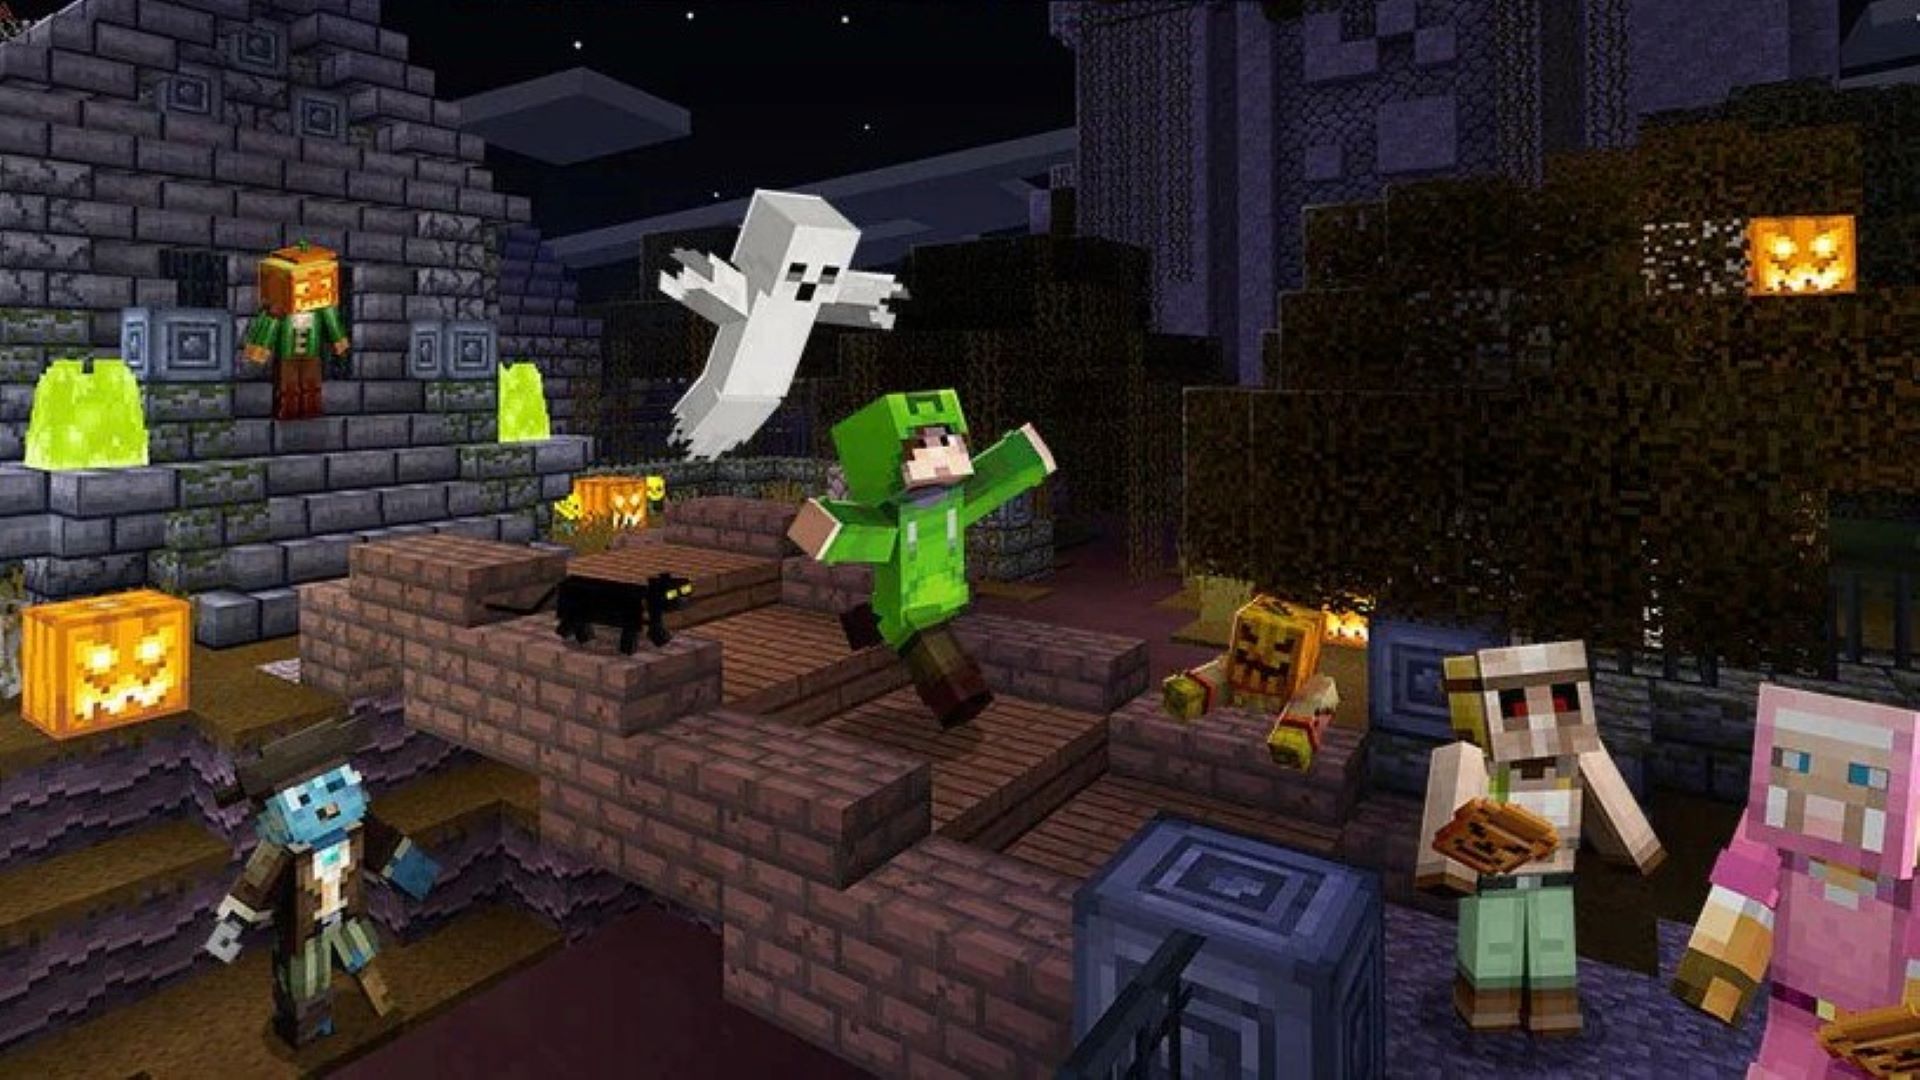 Minecraft Halloween celebration wants you to build things IRL